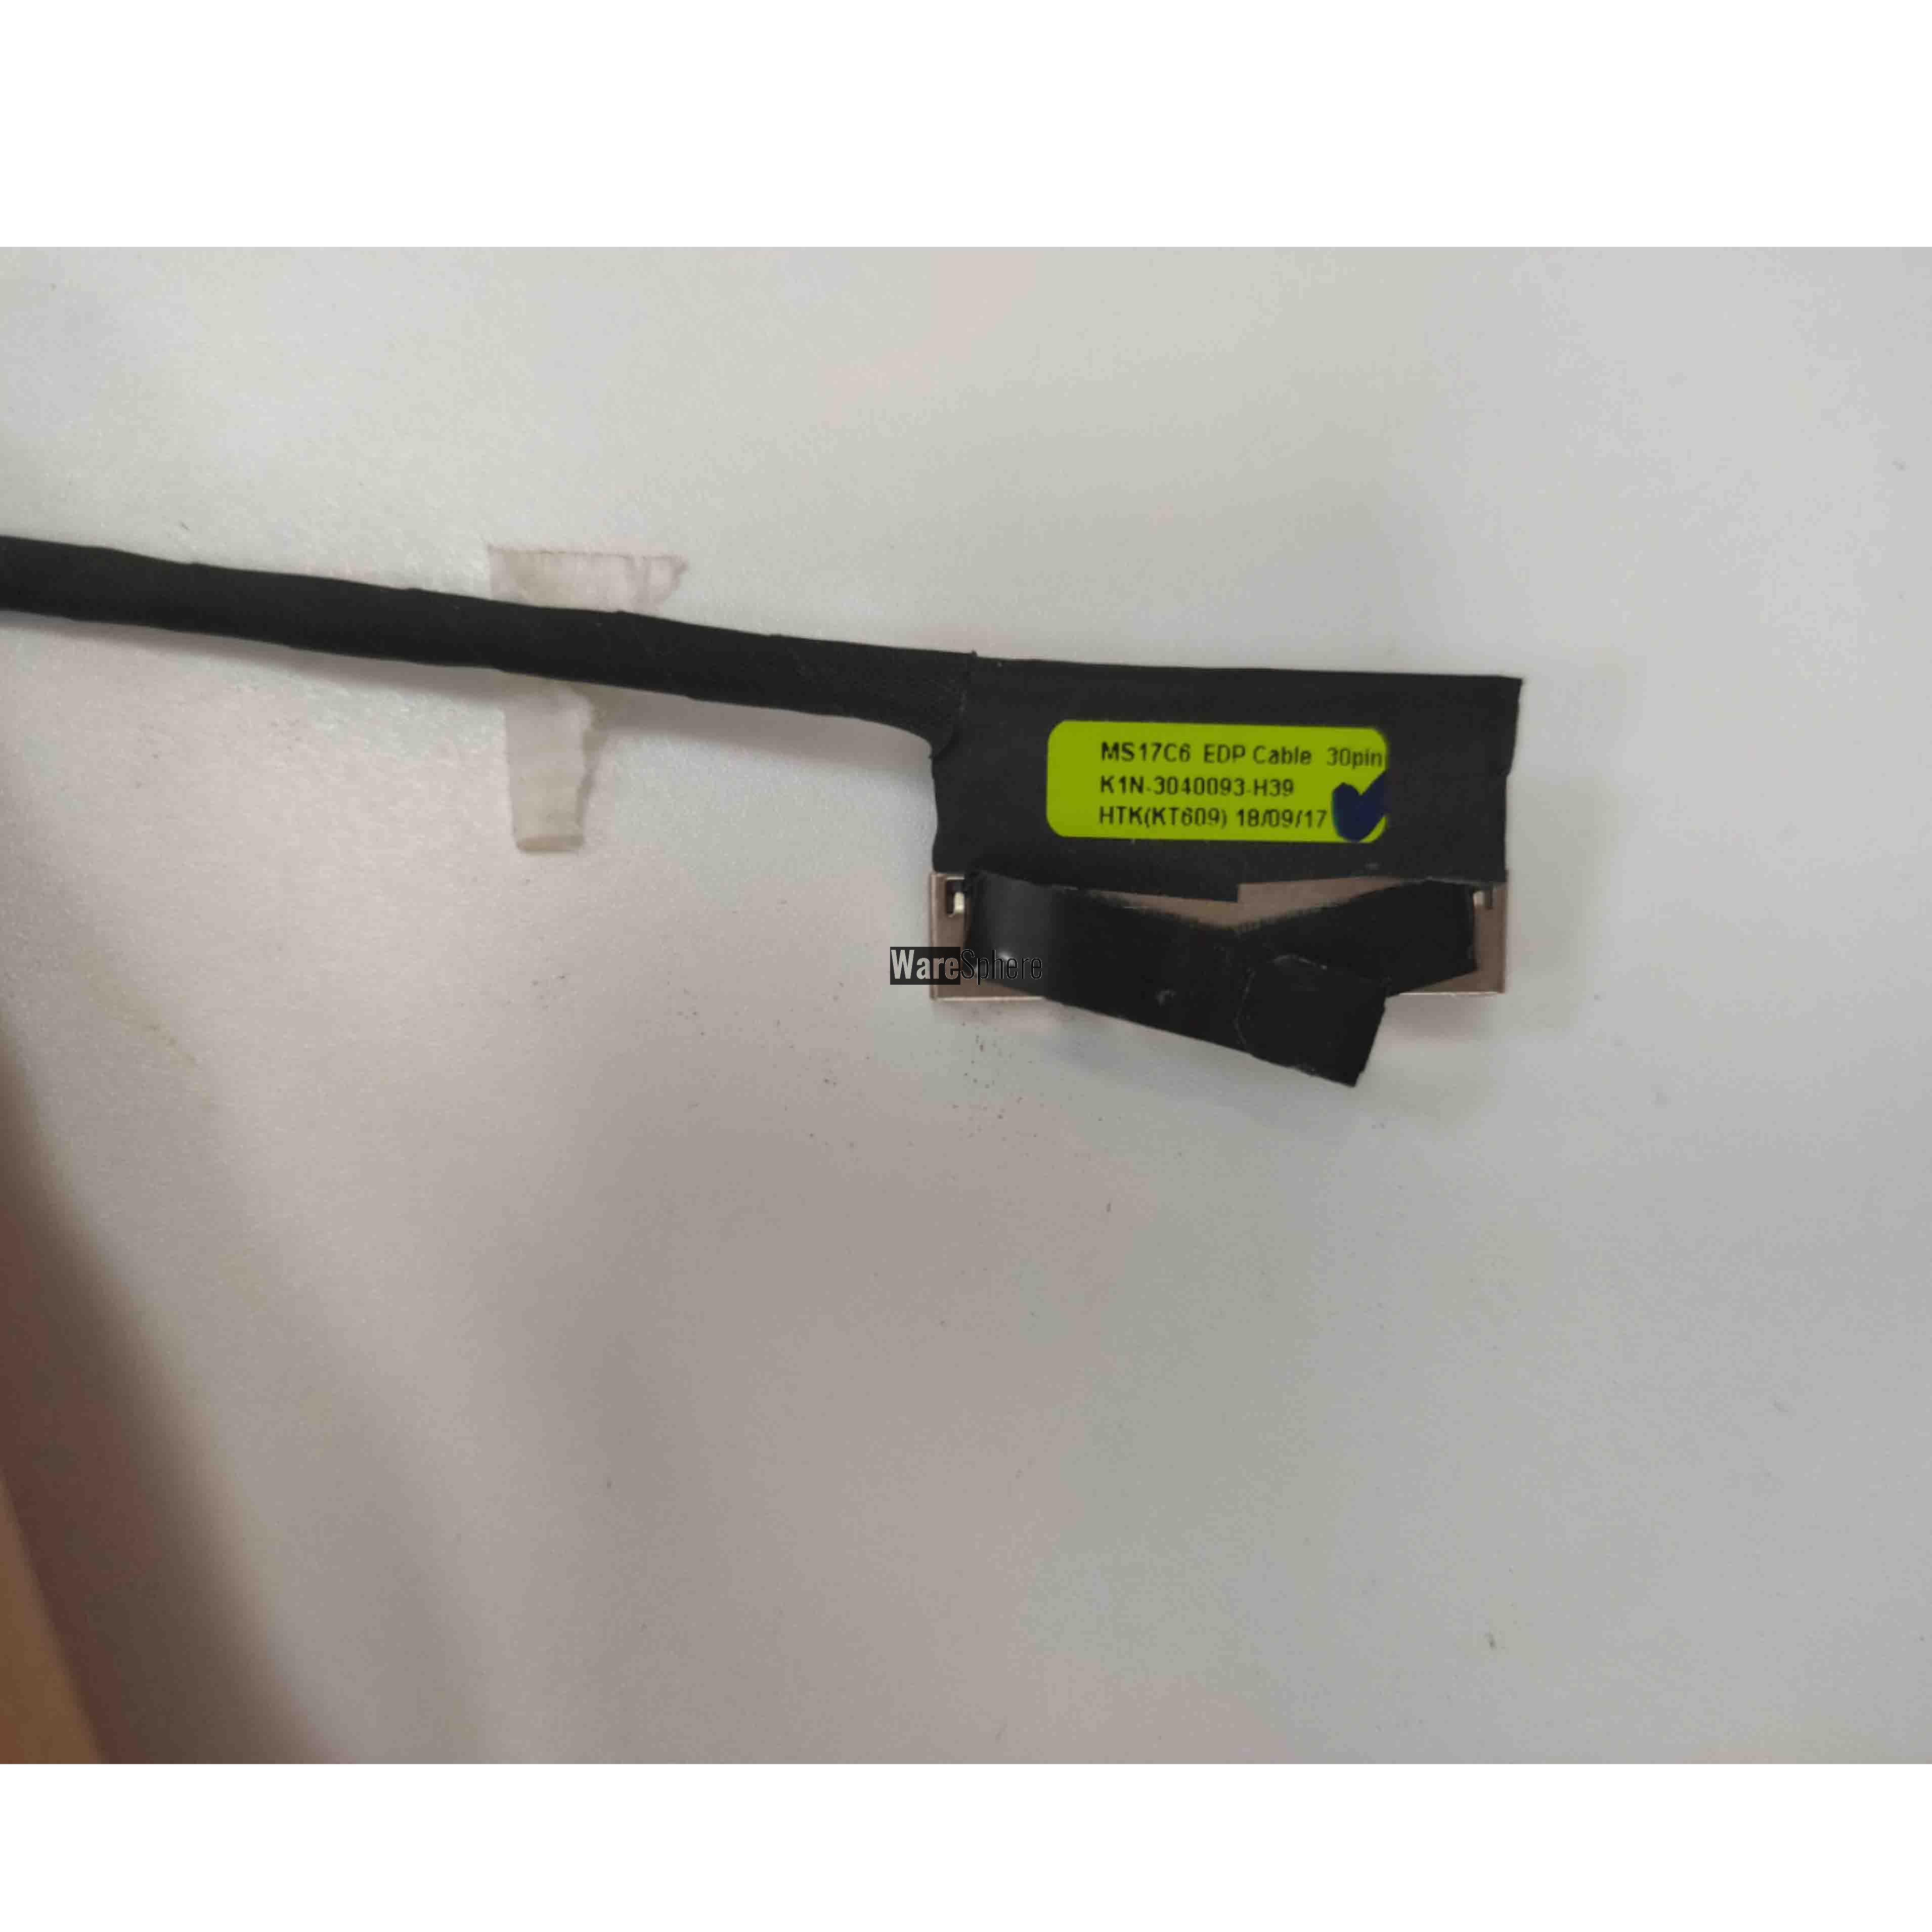 LCD Cable for MSI MS-17C6 K1N-3040093-H39 30Pin 